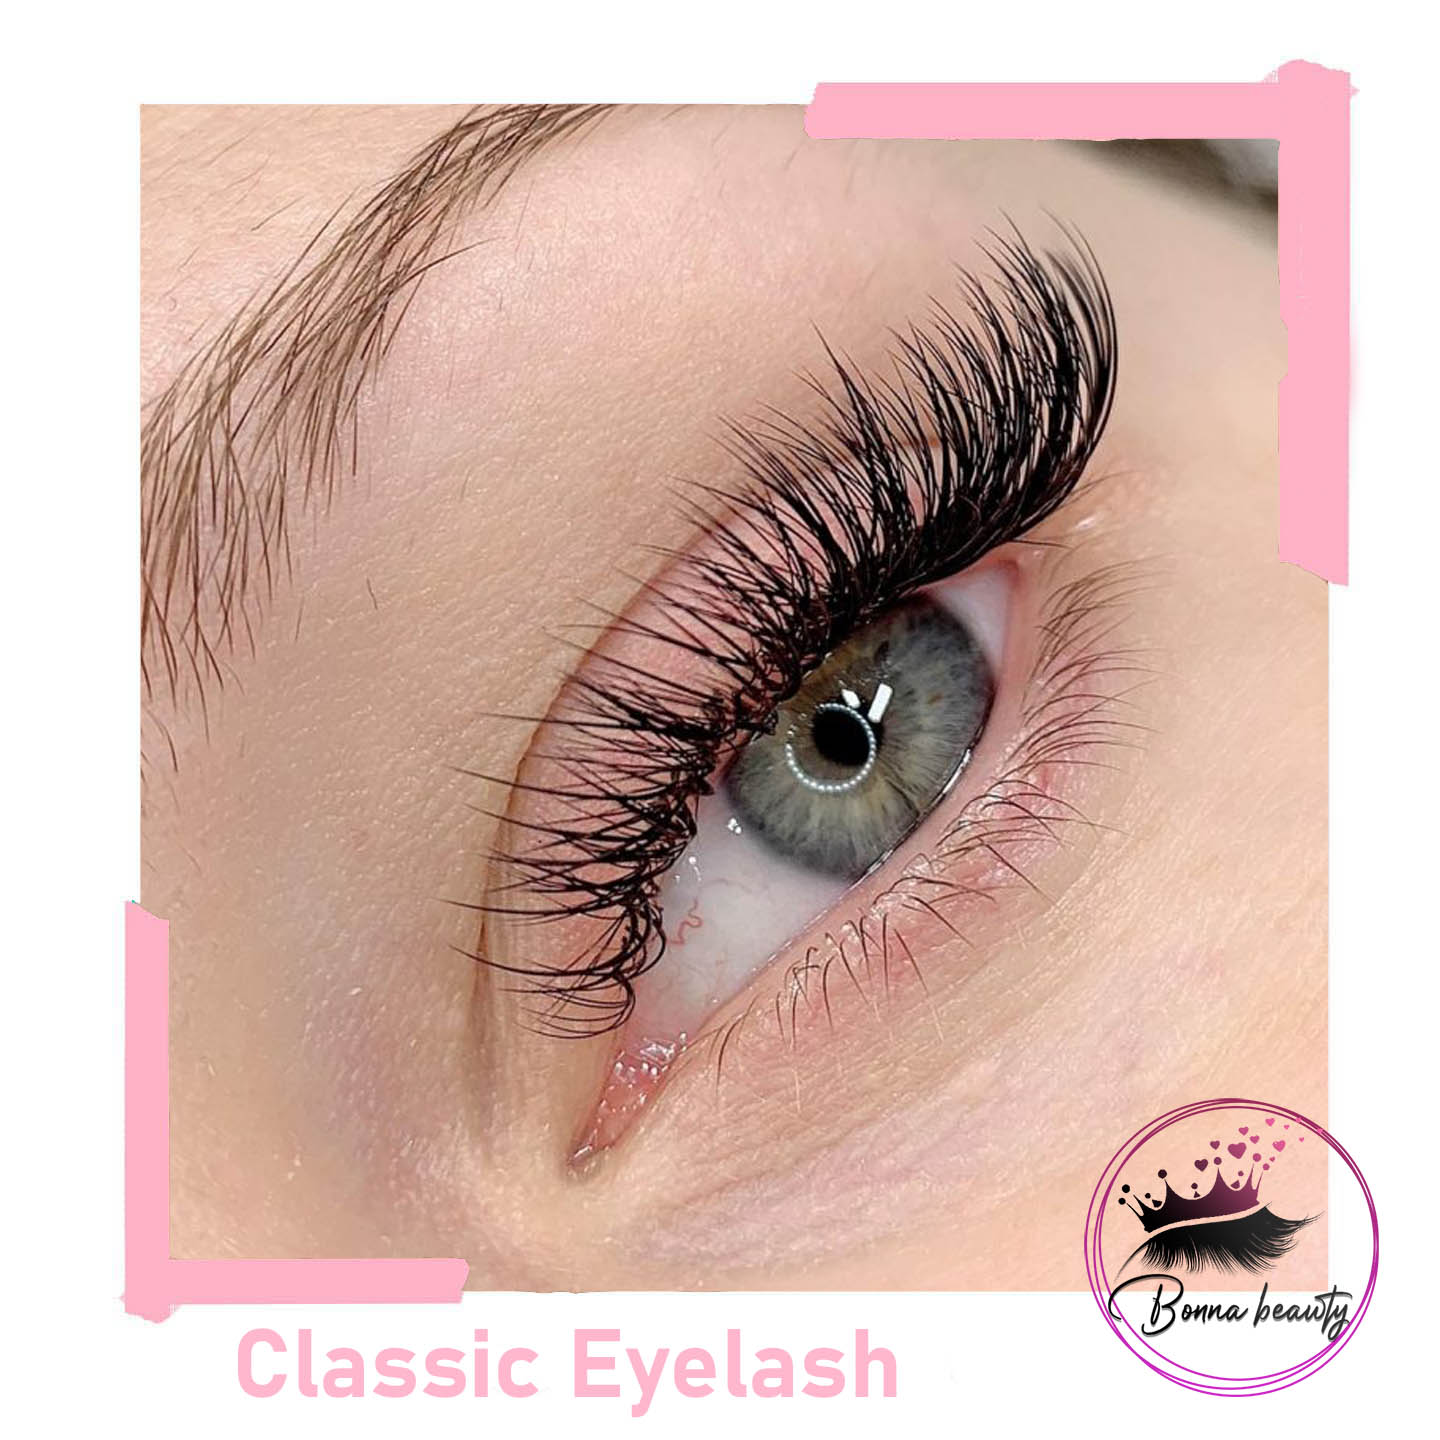 classic eyelash extension in Bankstown Sydney 5 Chester Hill Chester Hill